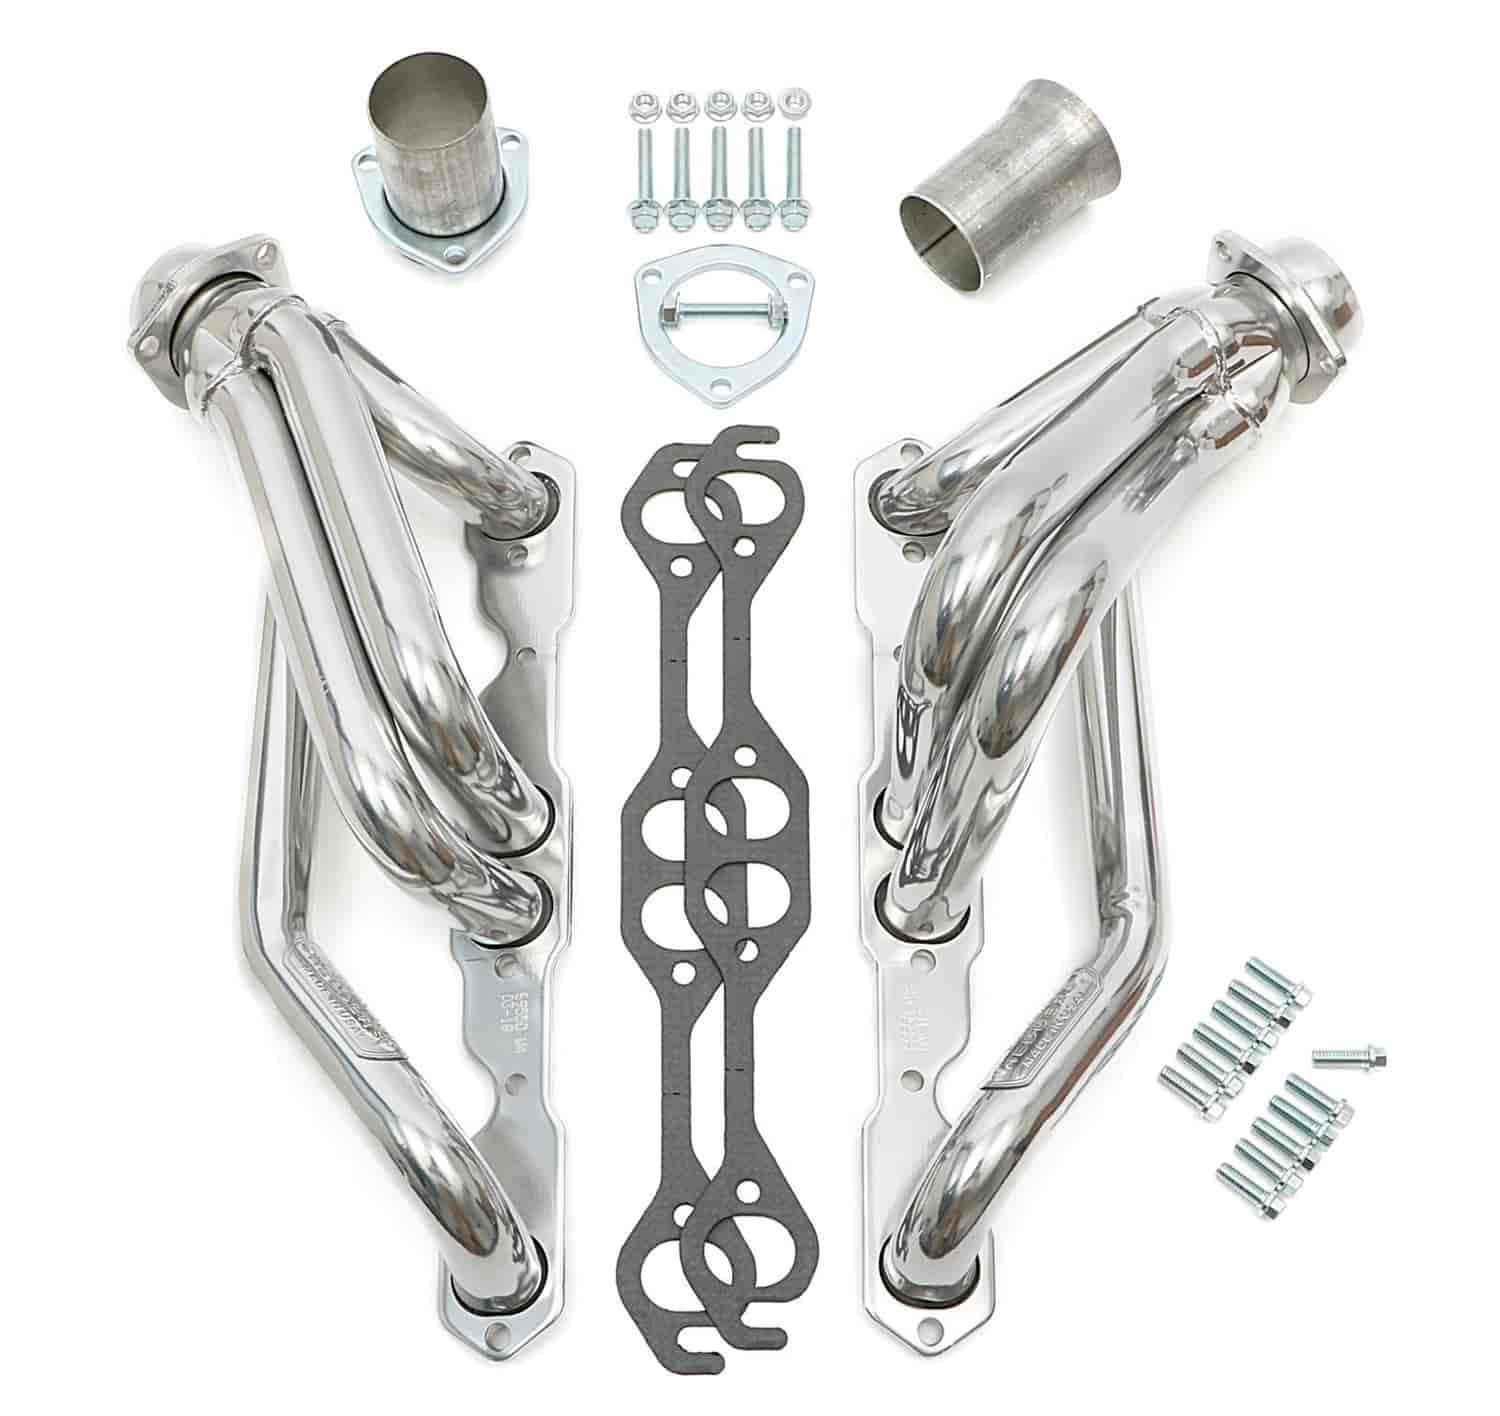 S10 Engine Swap Headers 1982-2000 S10 4x4 with Small Block Chevy 283-400